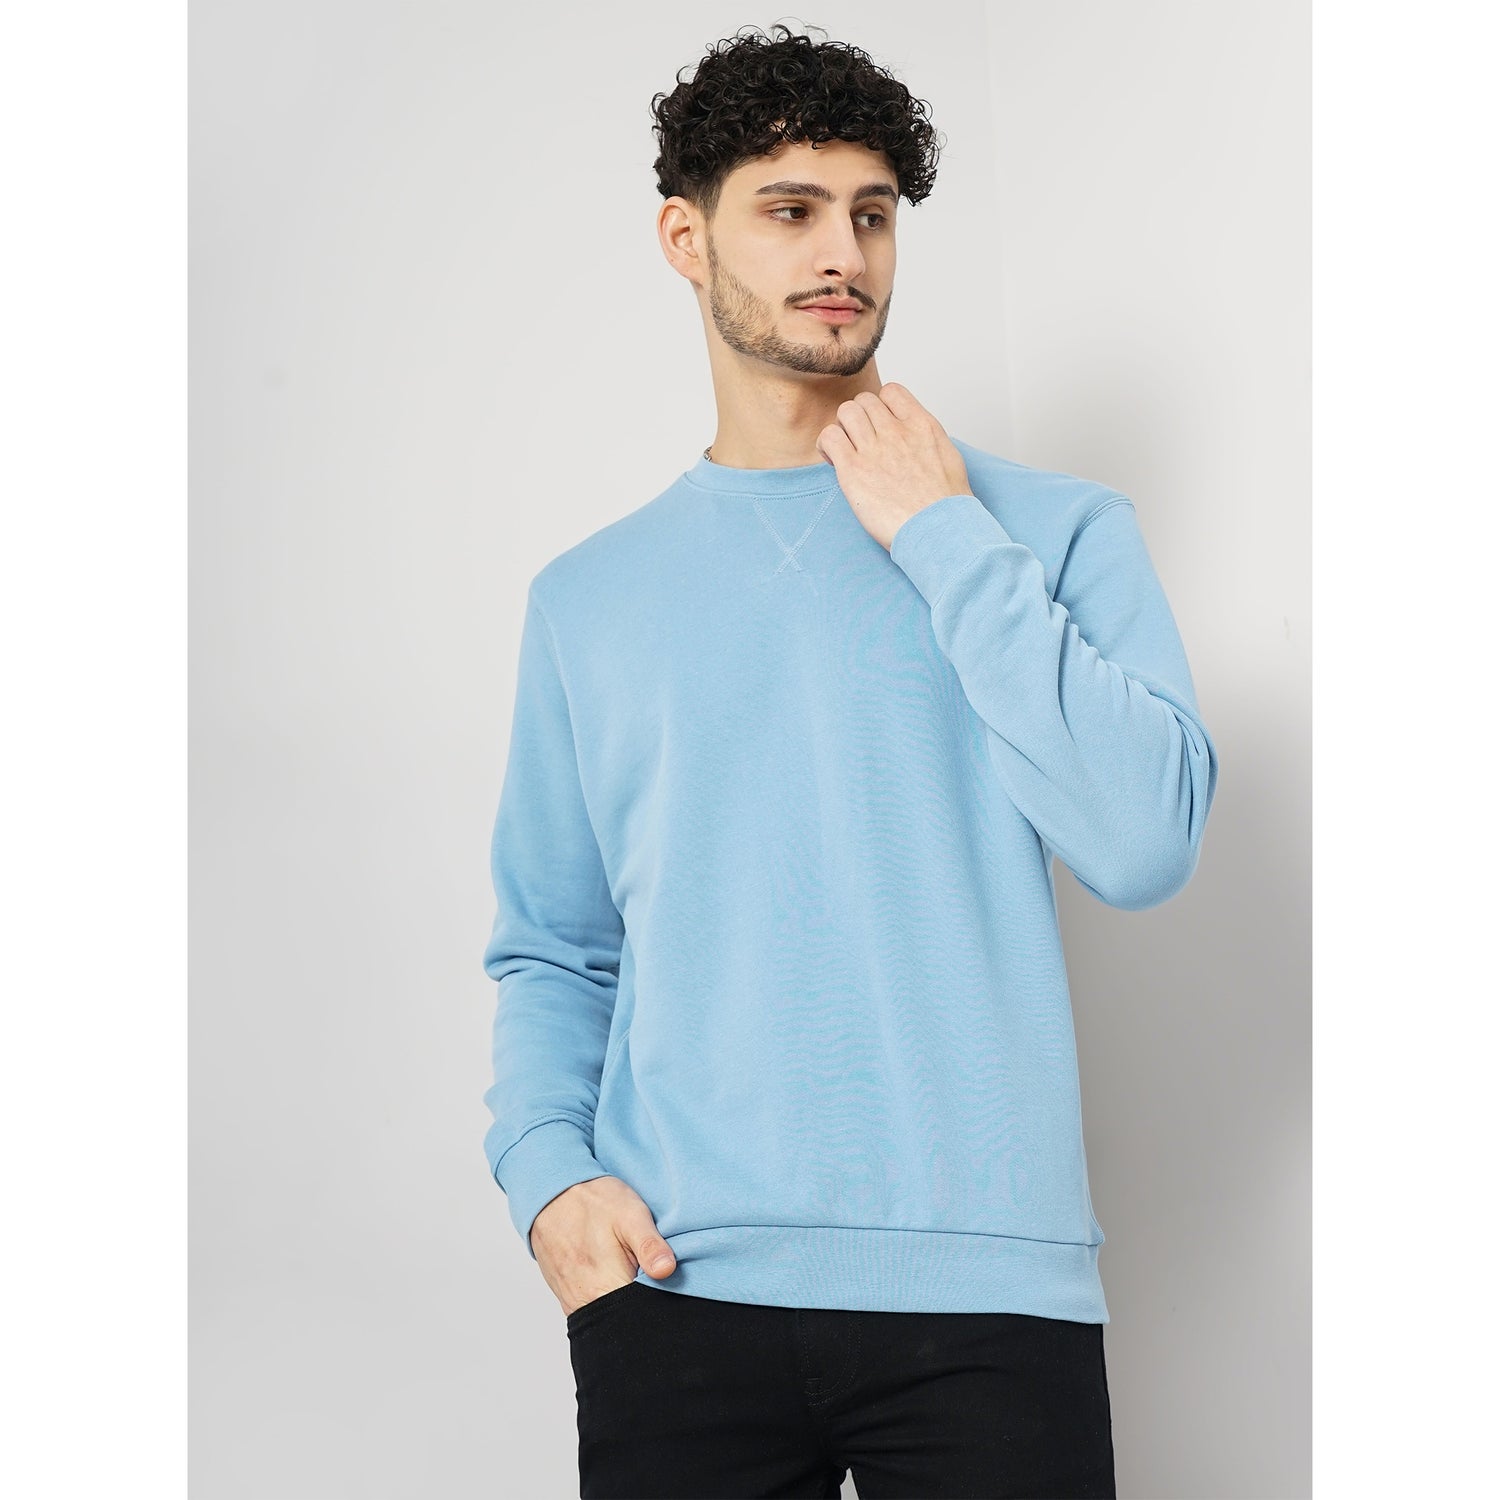 Solid Blue Full Round Neck Sweater (FESEVEN)